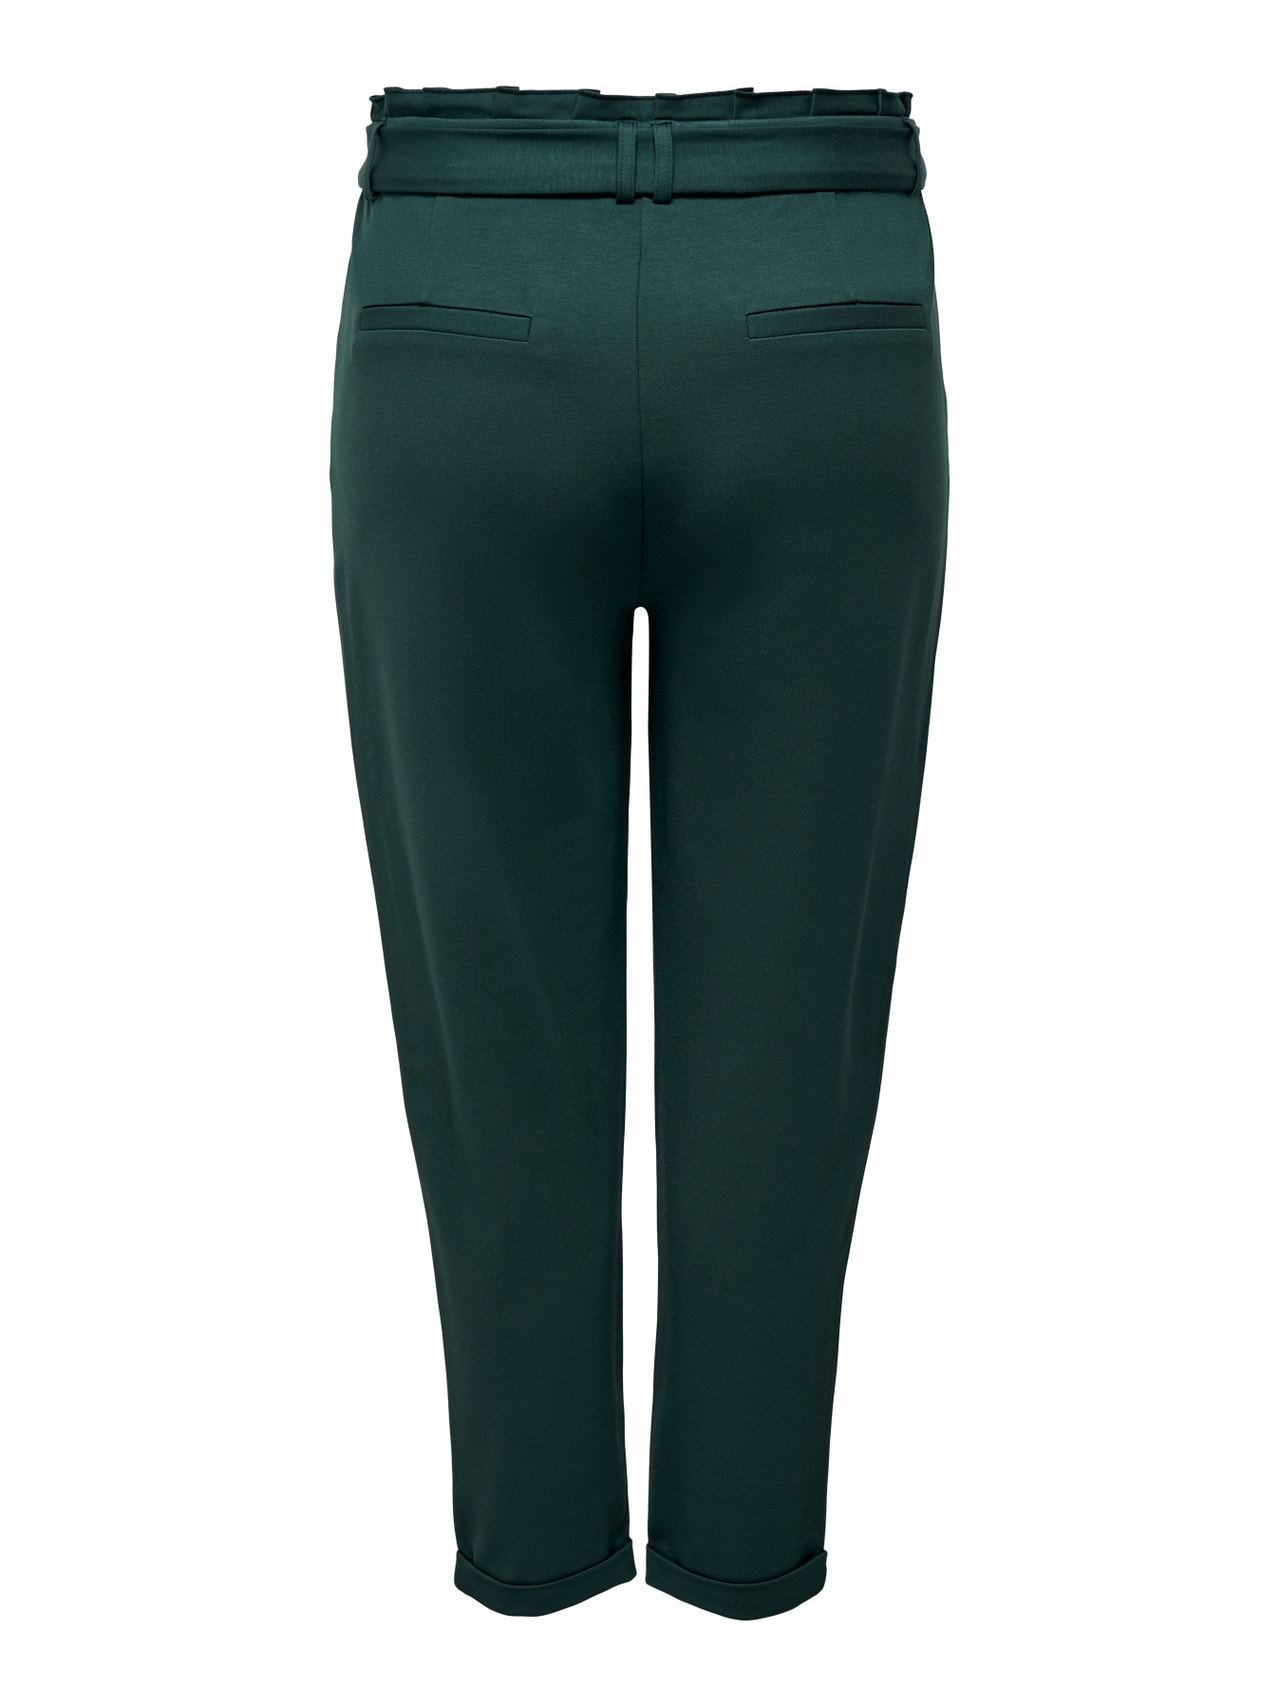 ONLY Curvy trousers with belt -Darkest Spruce - 15293377